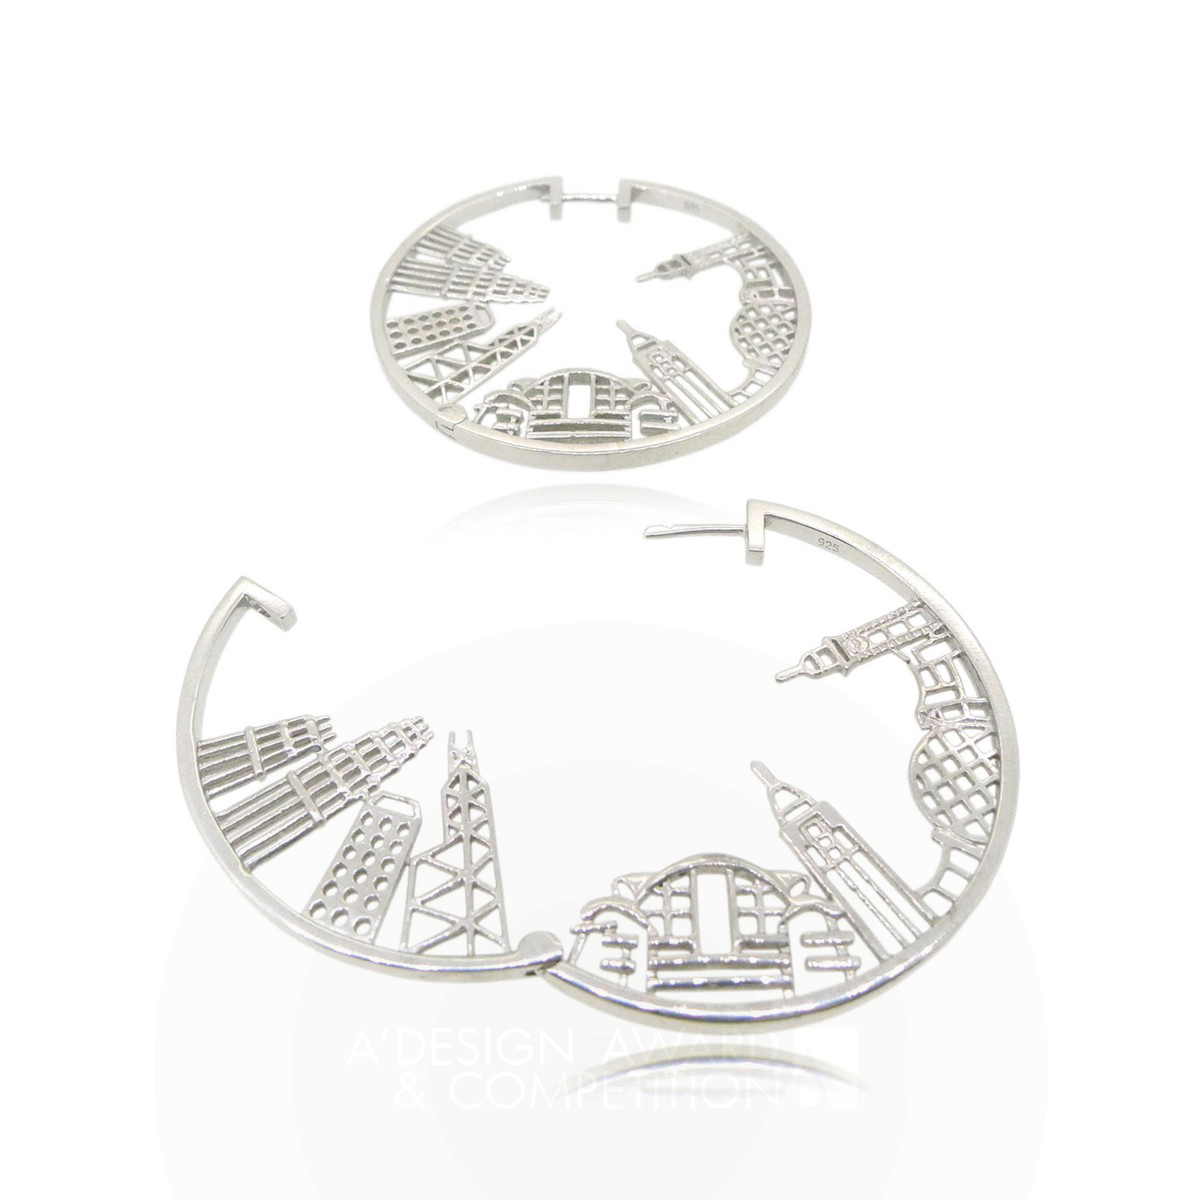 HONG KONG OAPES wins Silver at the prestigious A' Jewelry Design Award with Hong Kong Skyline Jewelry Collection.